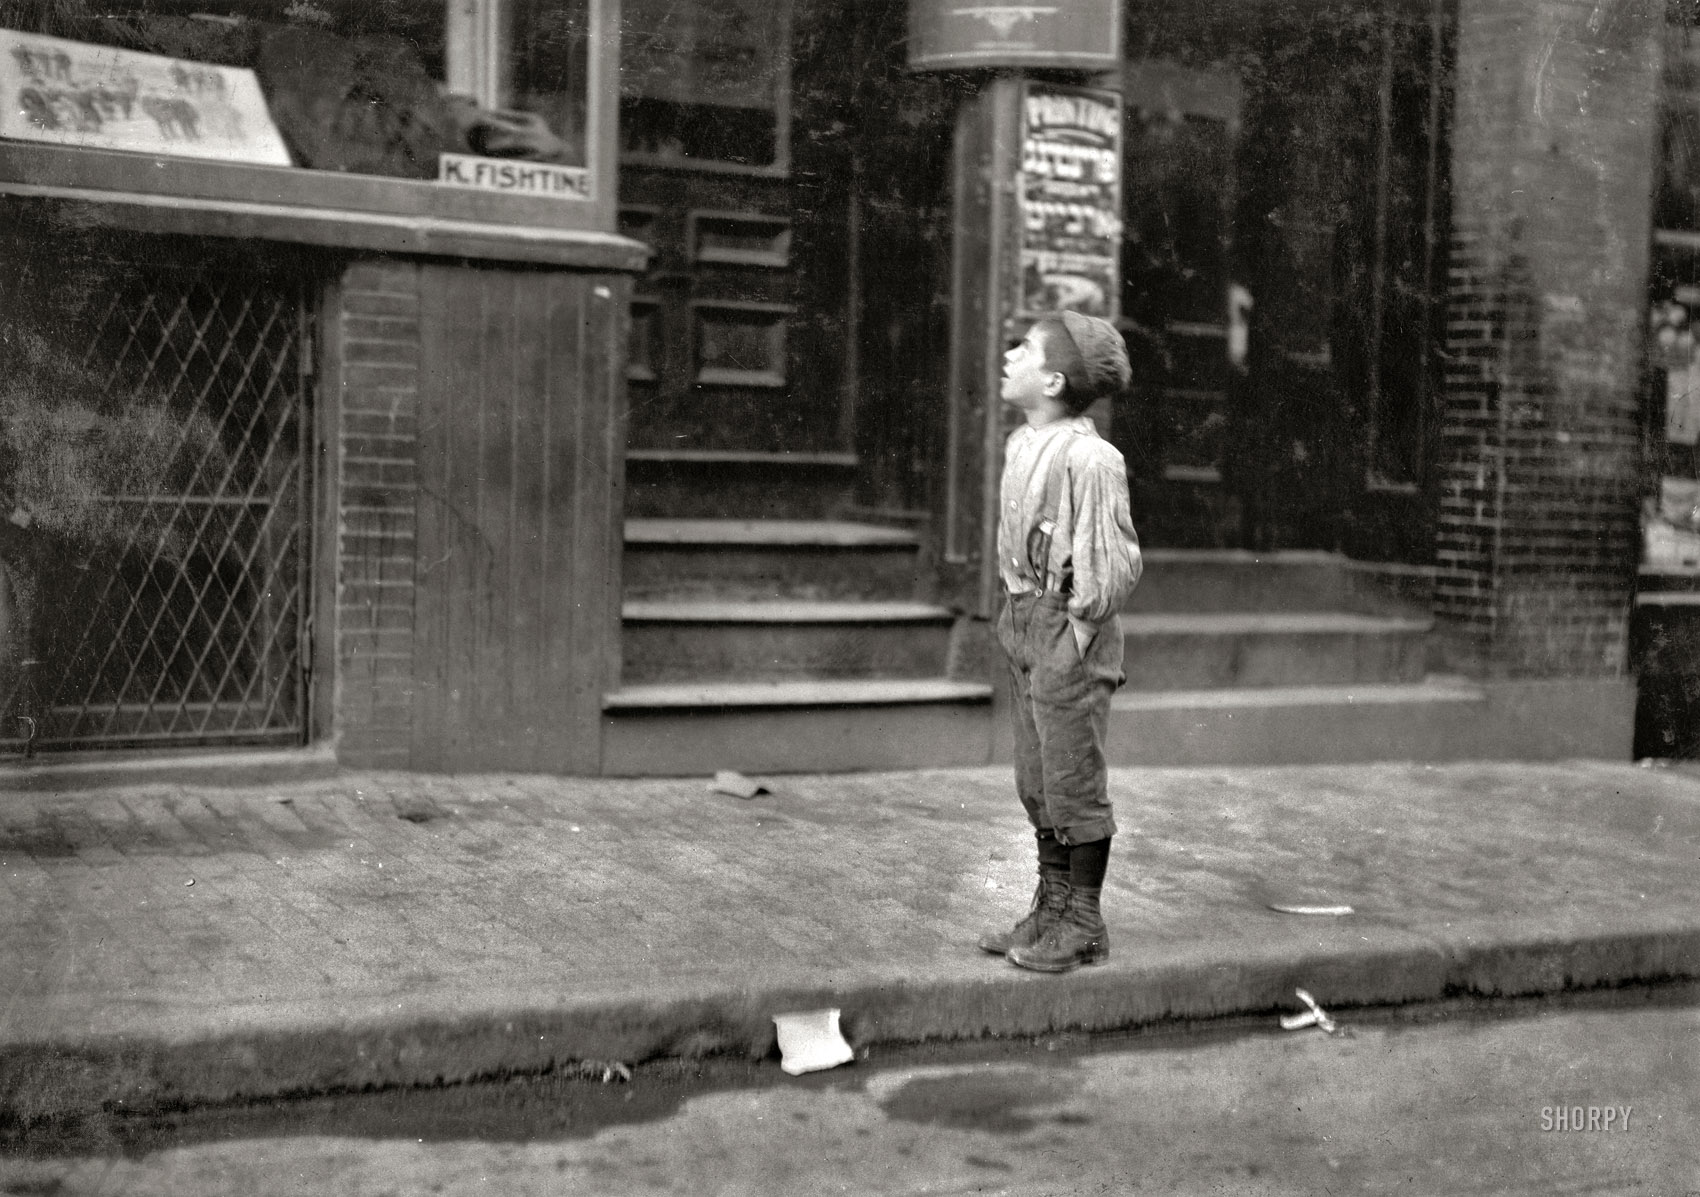 October 1909. Boston, Massachusetts. "Fire - Fire - I want to make the fire. An Italian boy on Salem Street Saturday morning, offering to make fires for Jewish People." Photograph and caption by Lewis Wickes Hine. View full size.